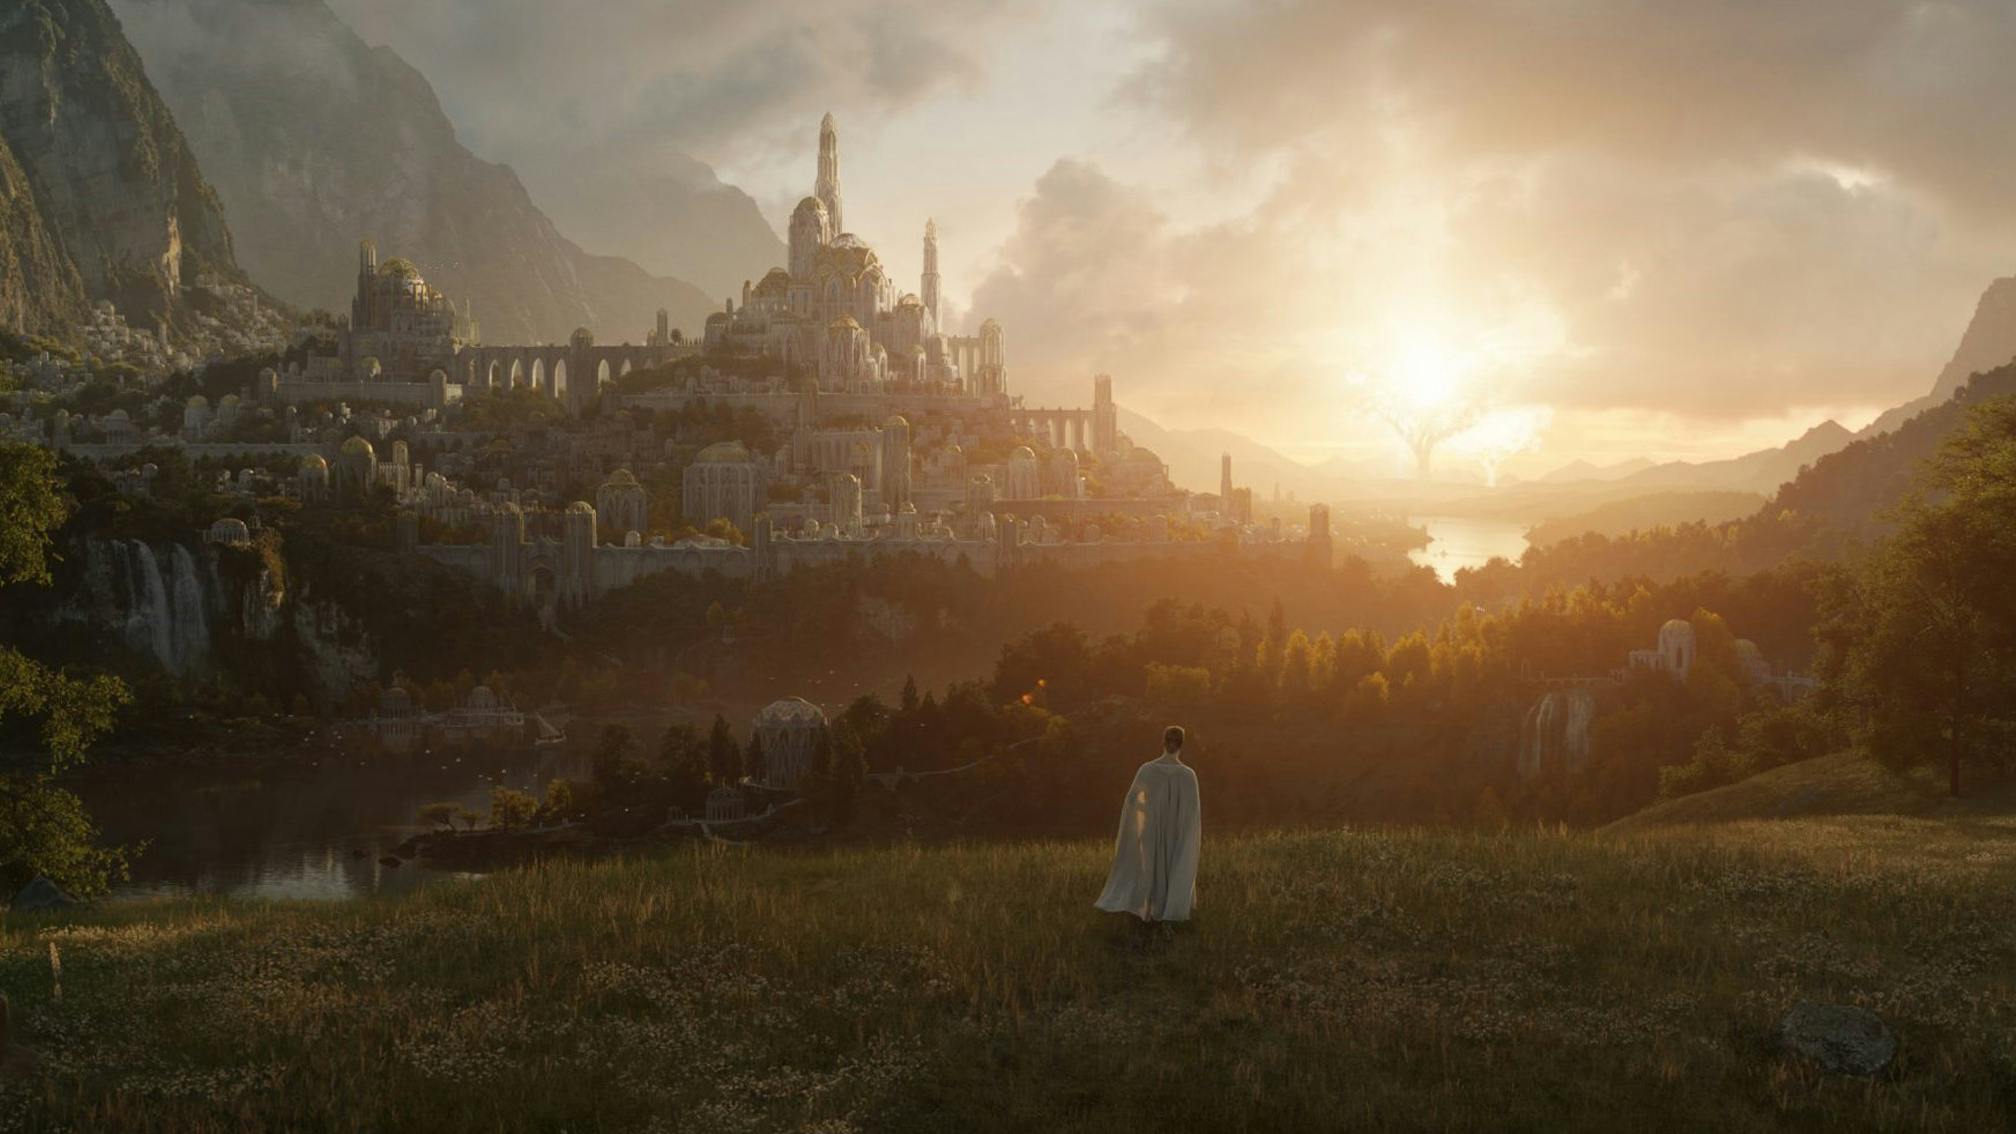 Amazon share stunning first-look image and premiere date for The Lord Of The Rings TV series